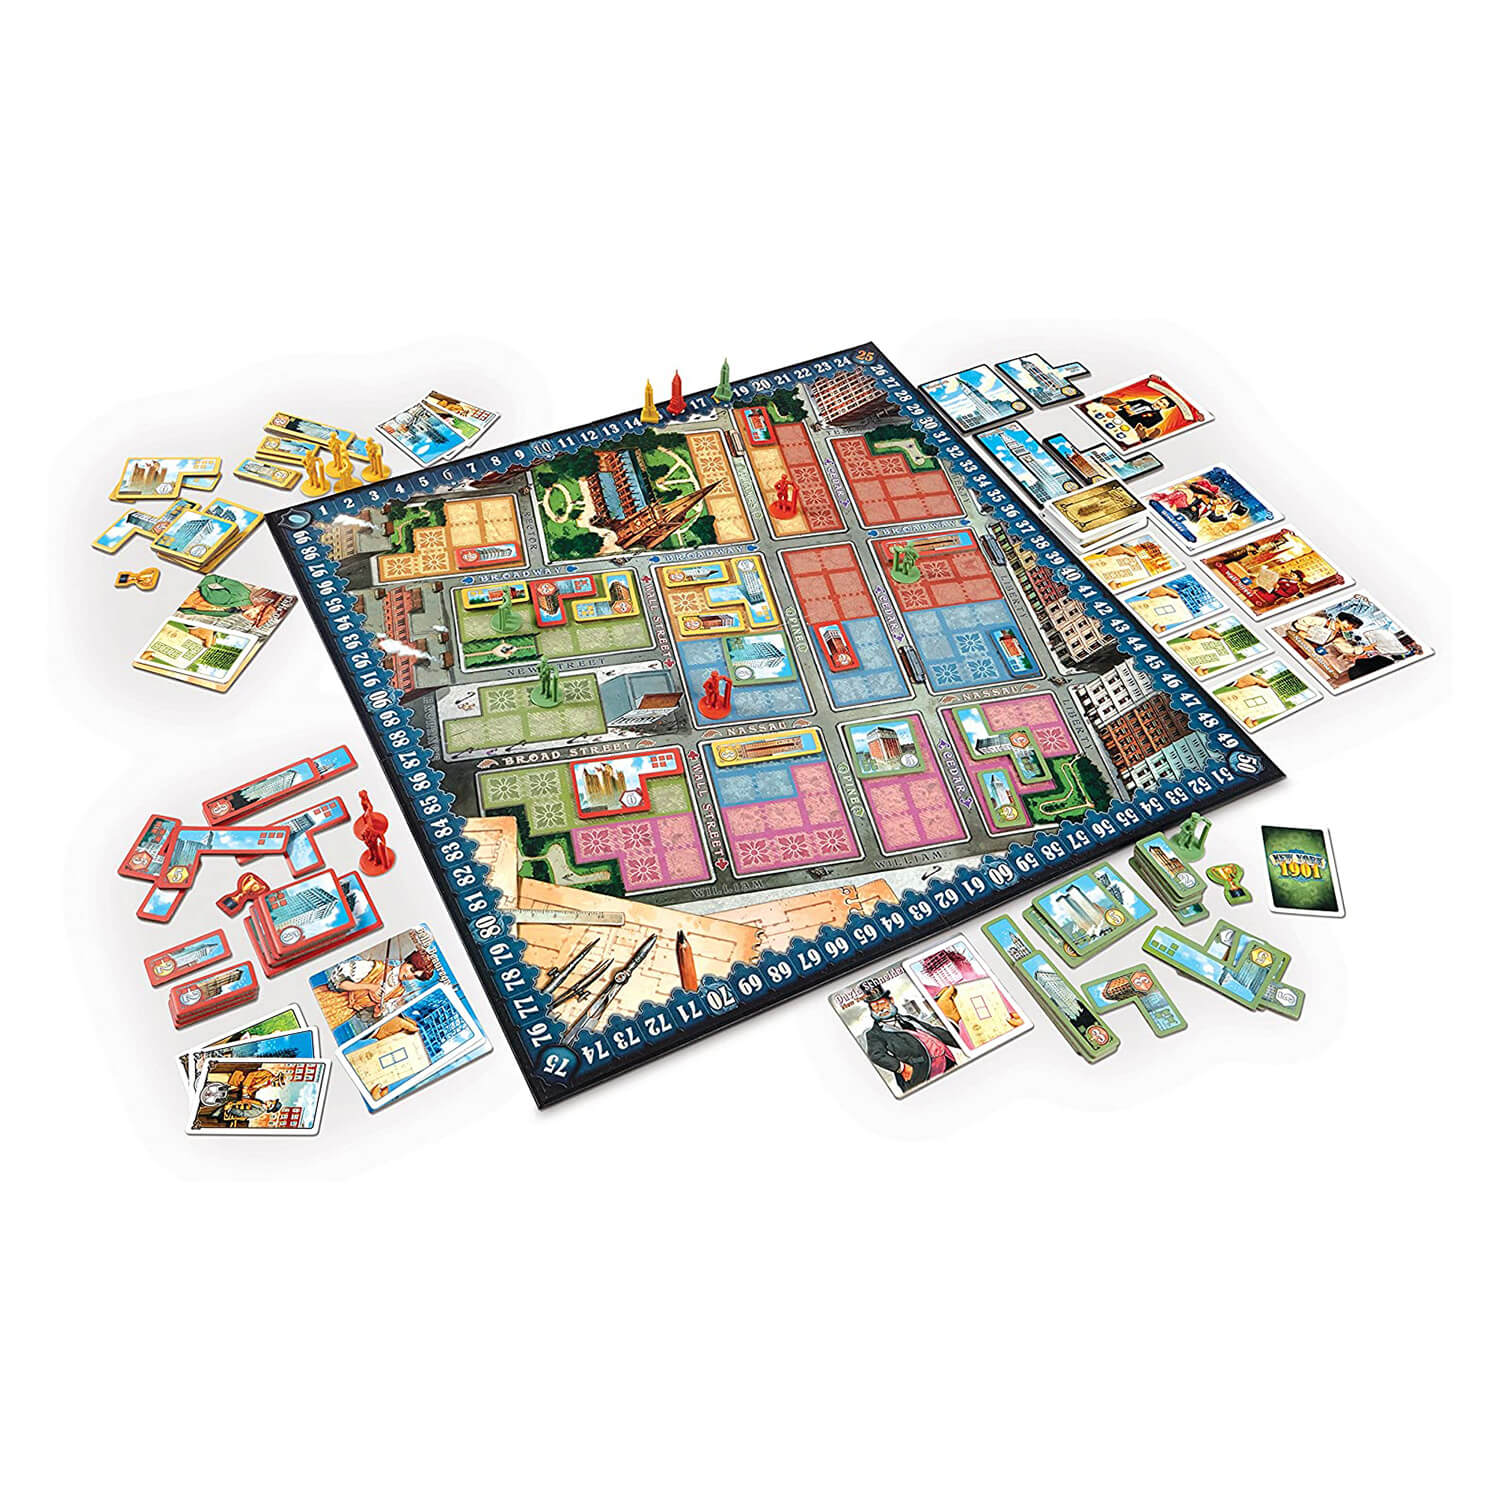 Example gameboard set up.